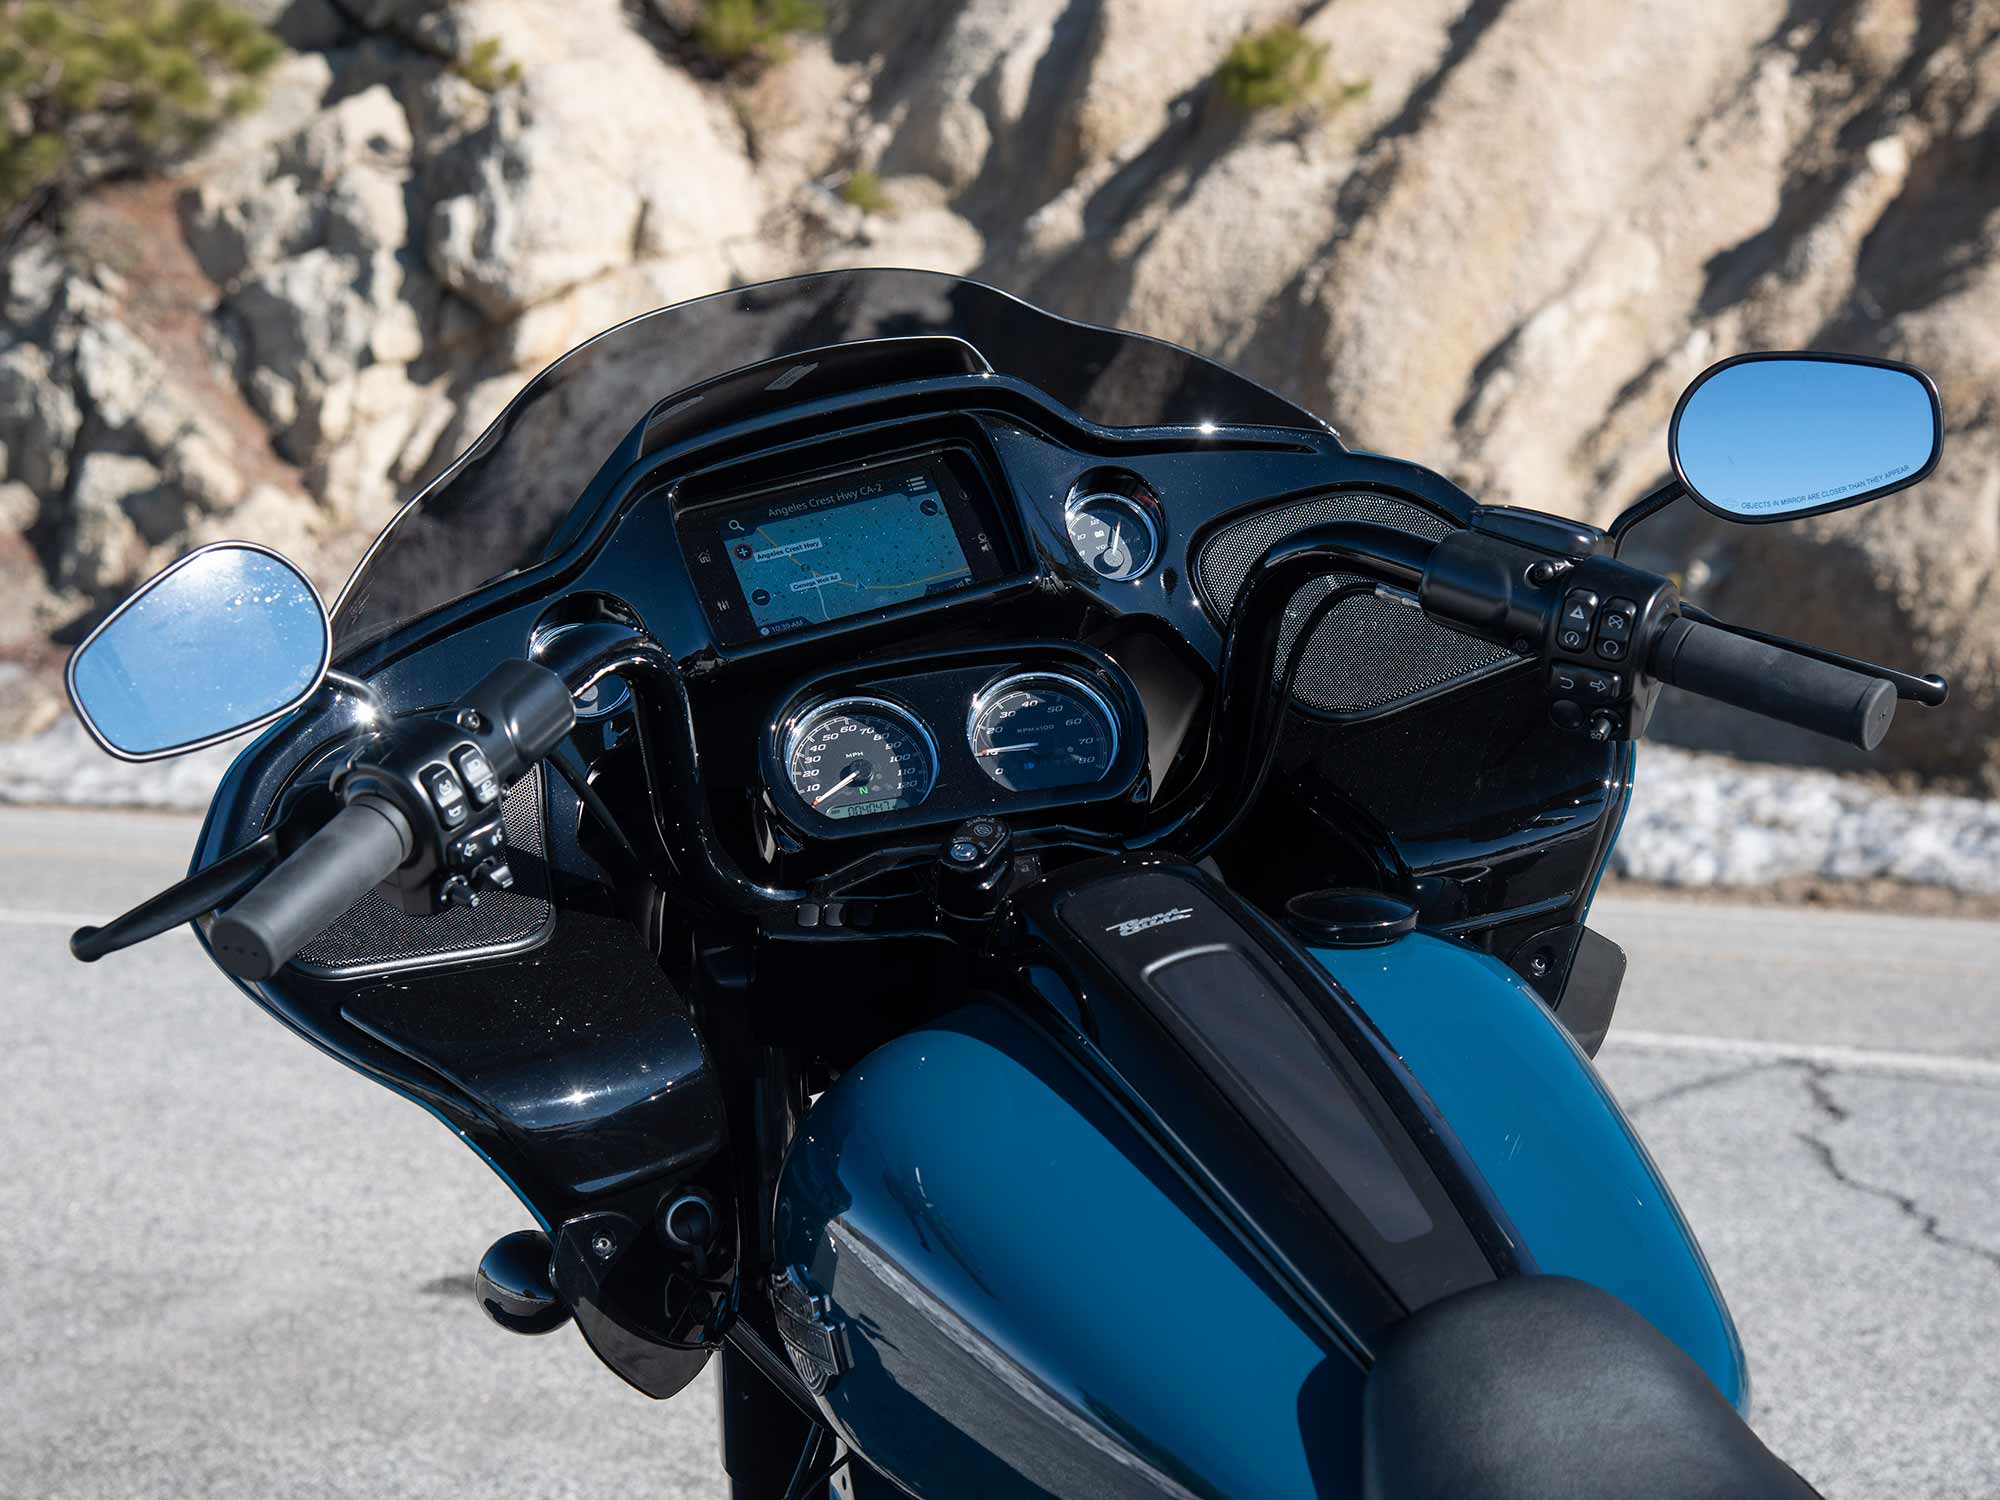 2021 Harley-Davidson Road Glide Special Review